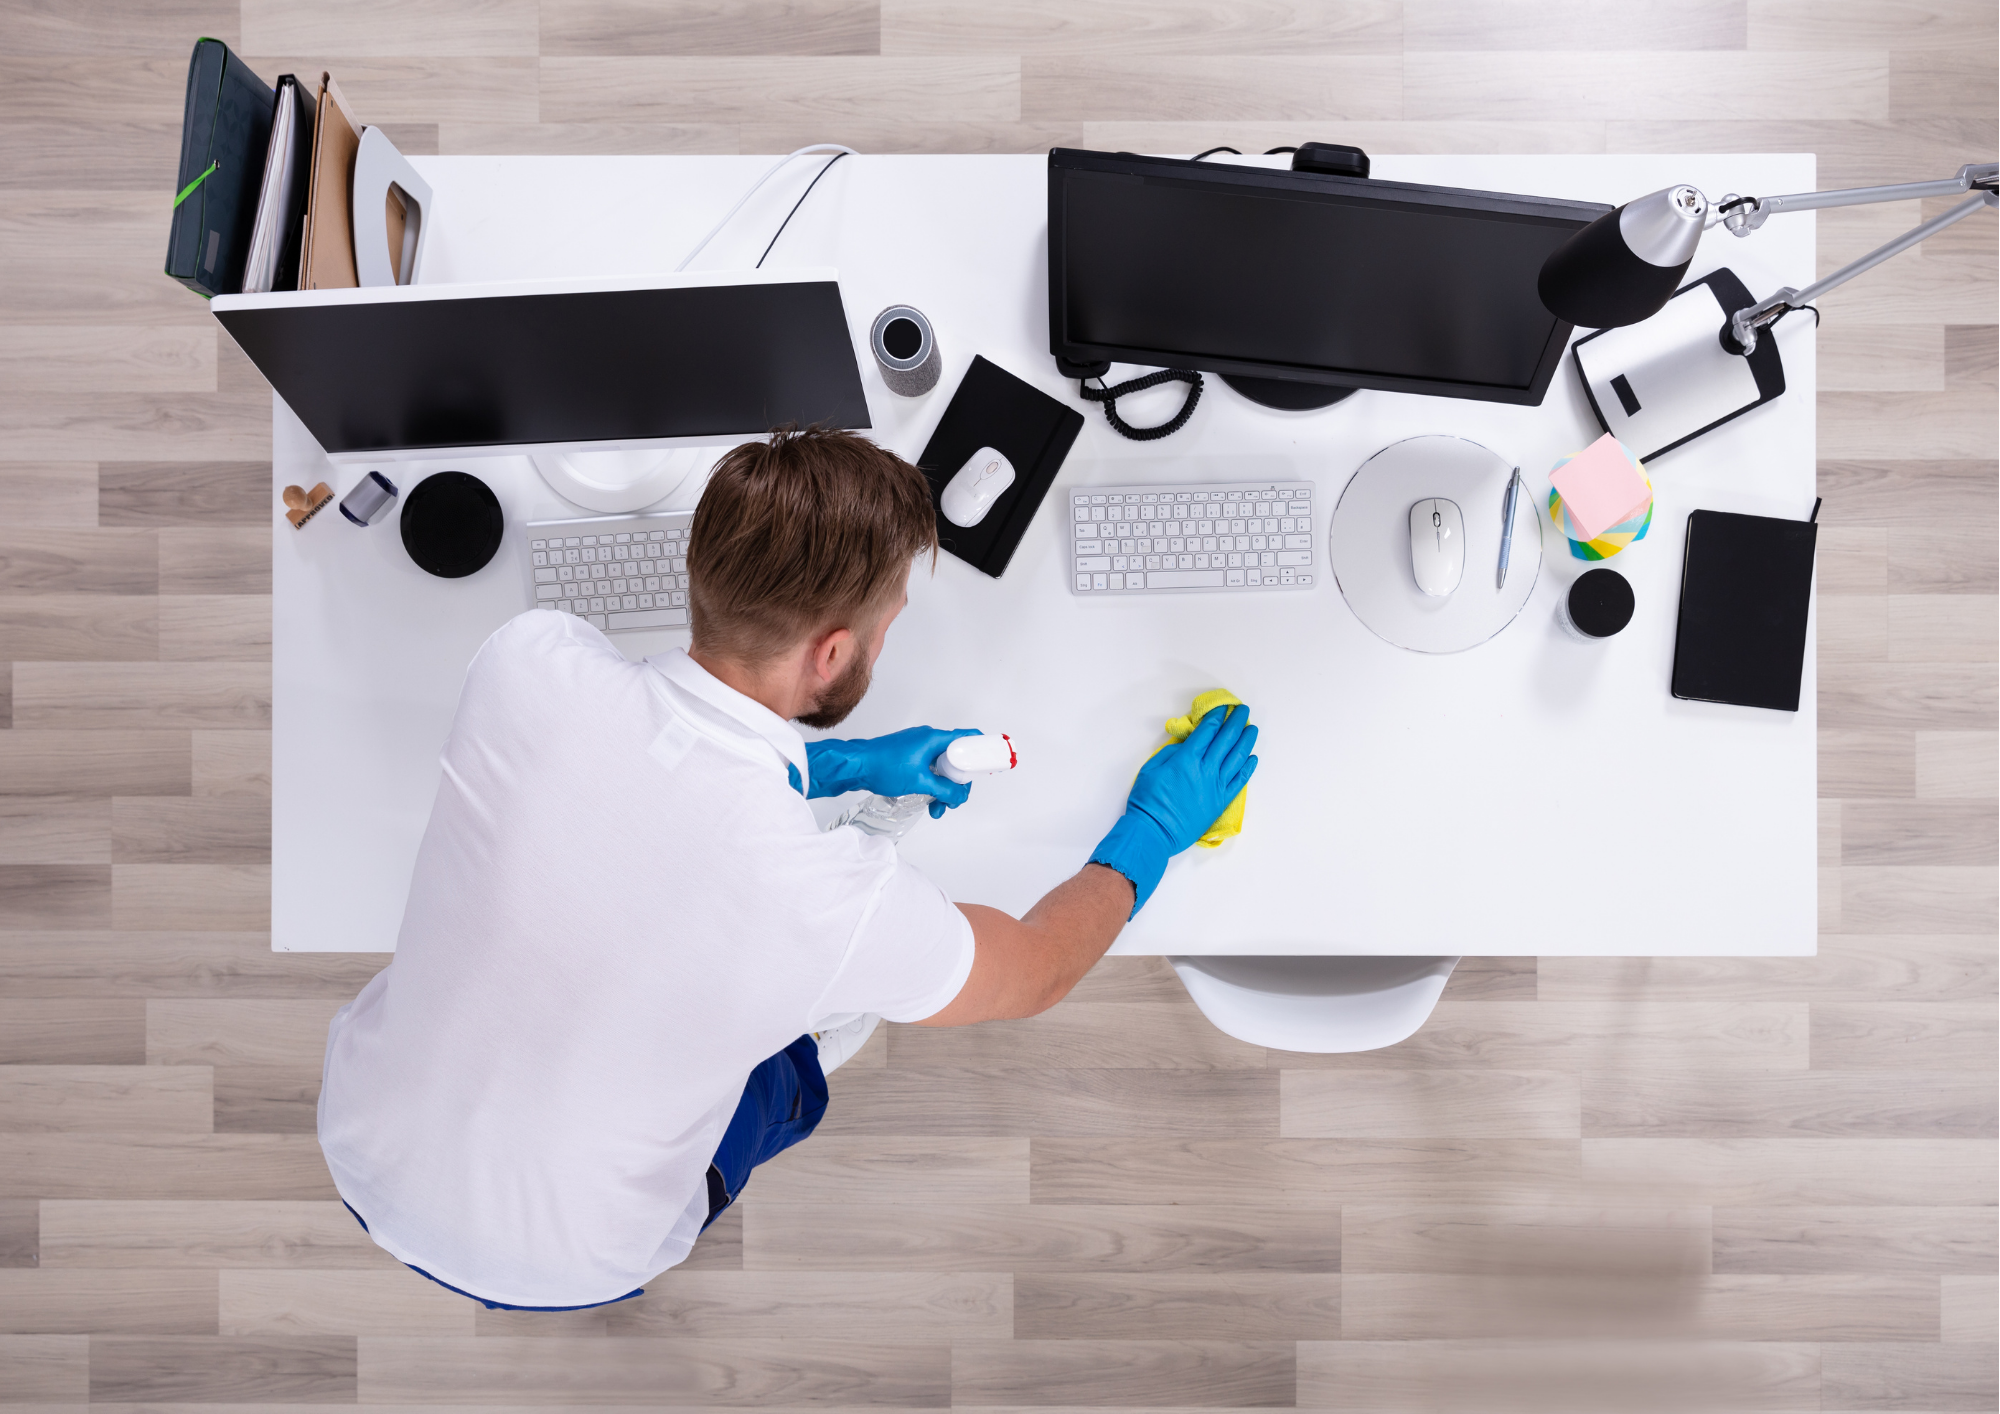 Spring Cleaning: 7 Things in the Office That Need to Go!